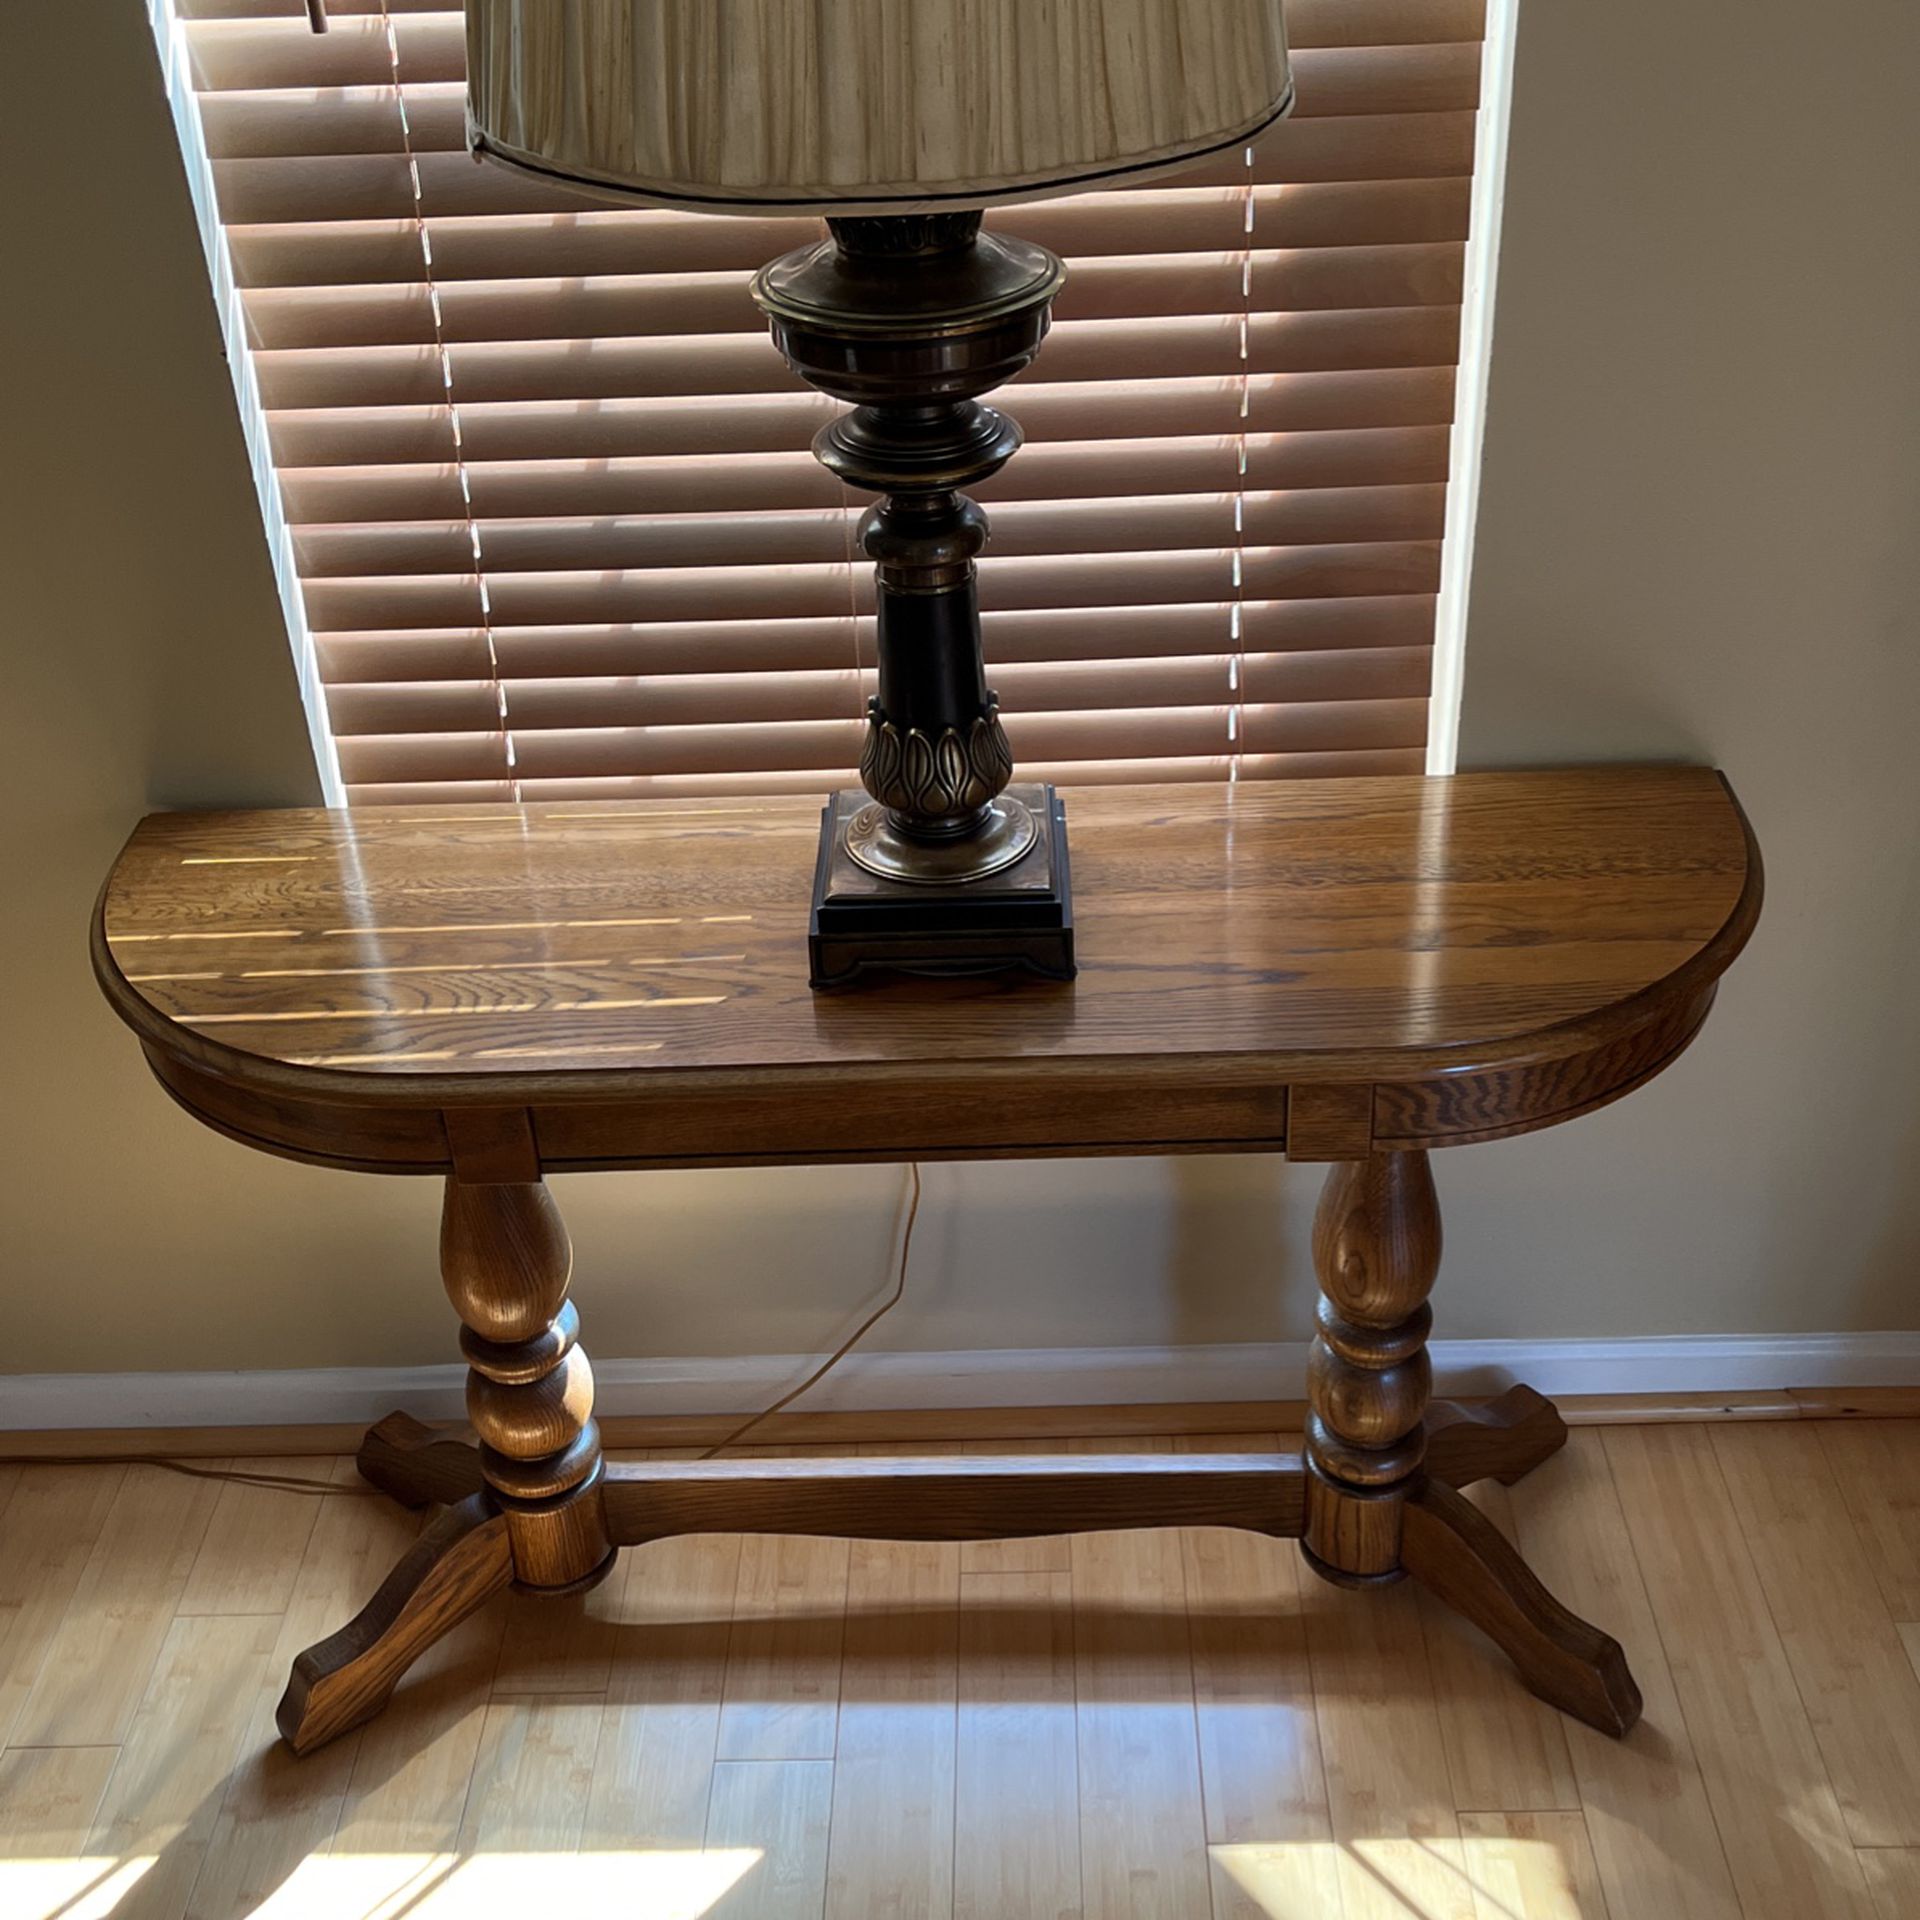 Sofa table and solid brass lamp